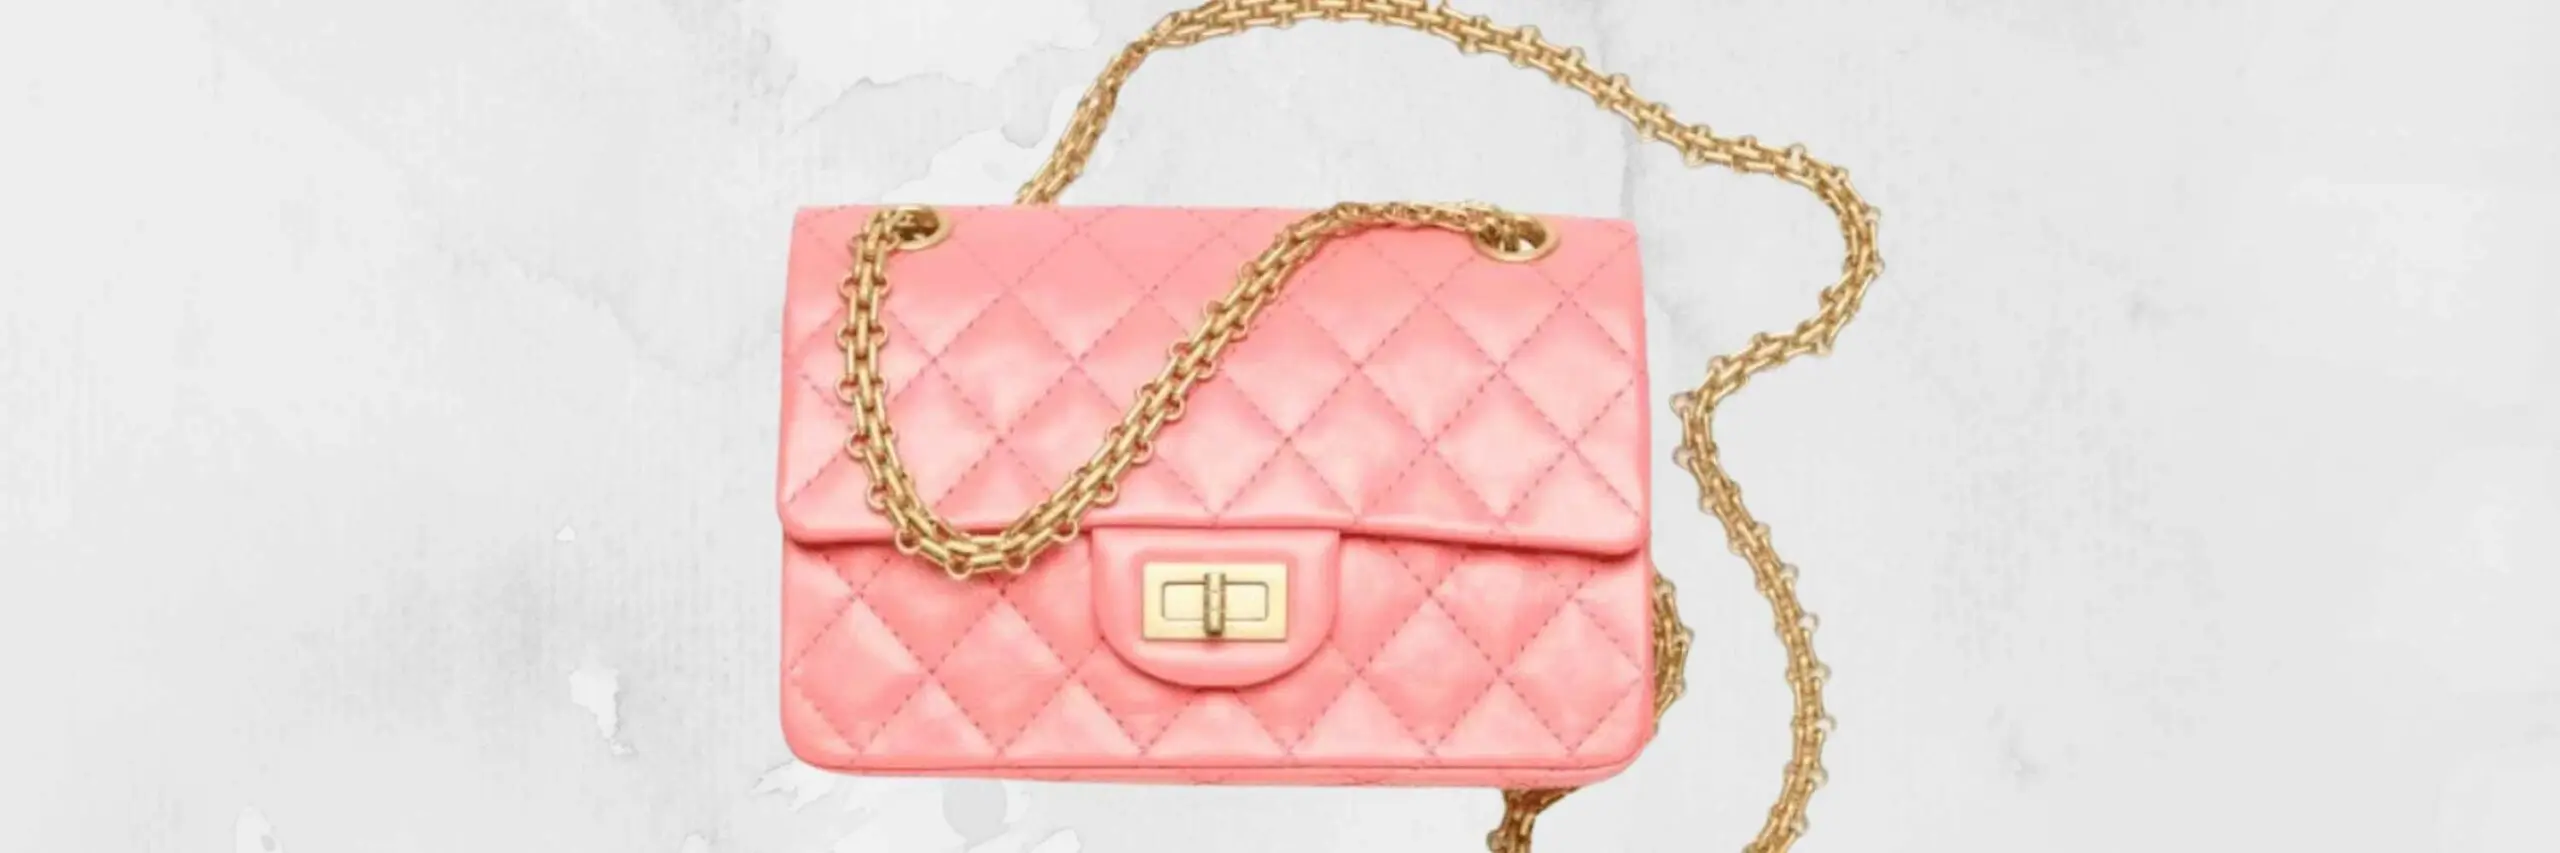 11 Most Popular Chanel Bags Worth Buying